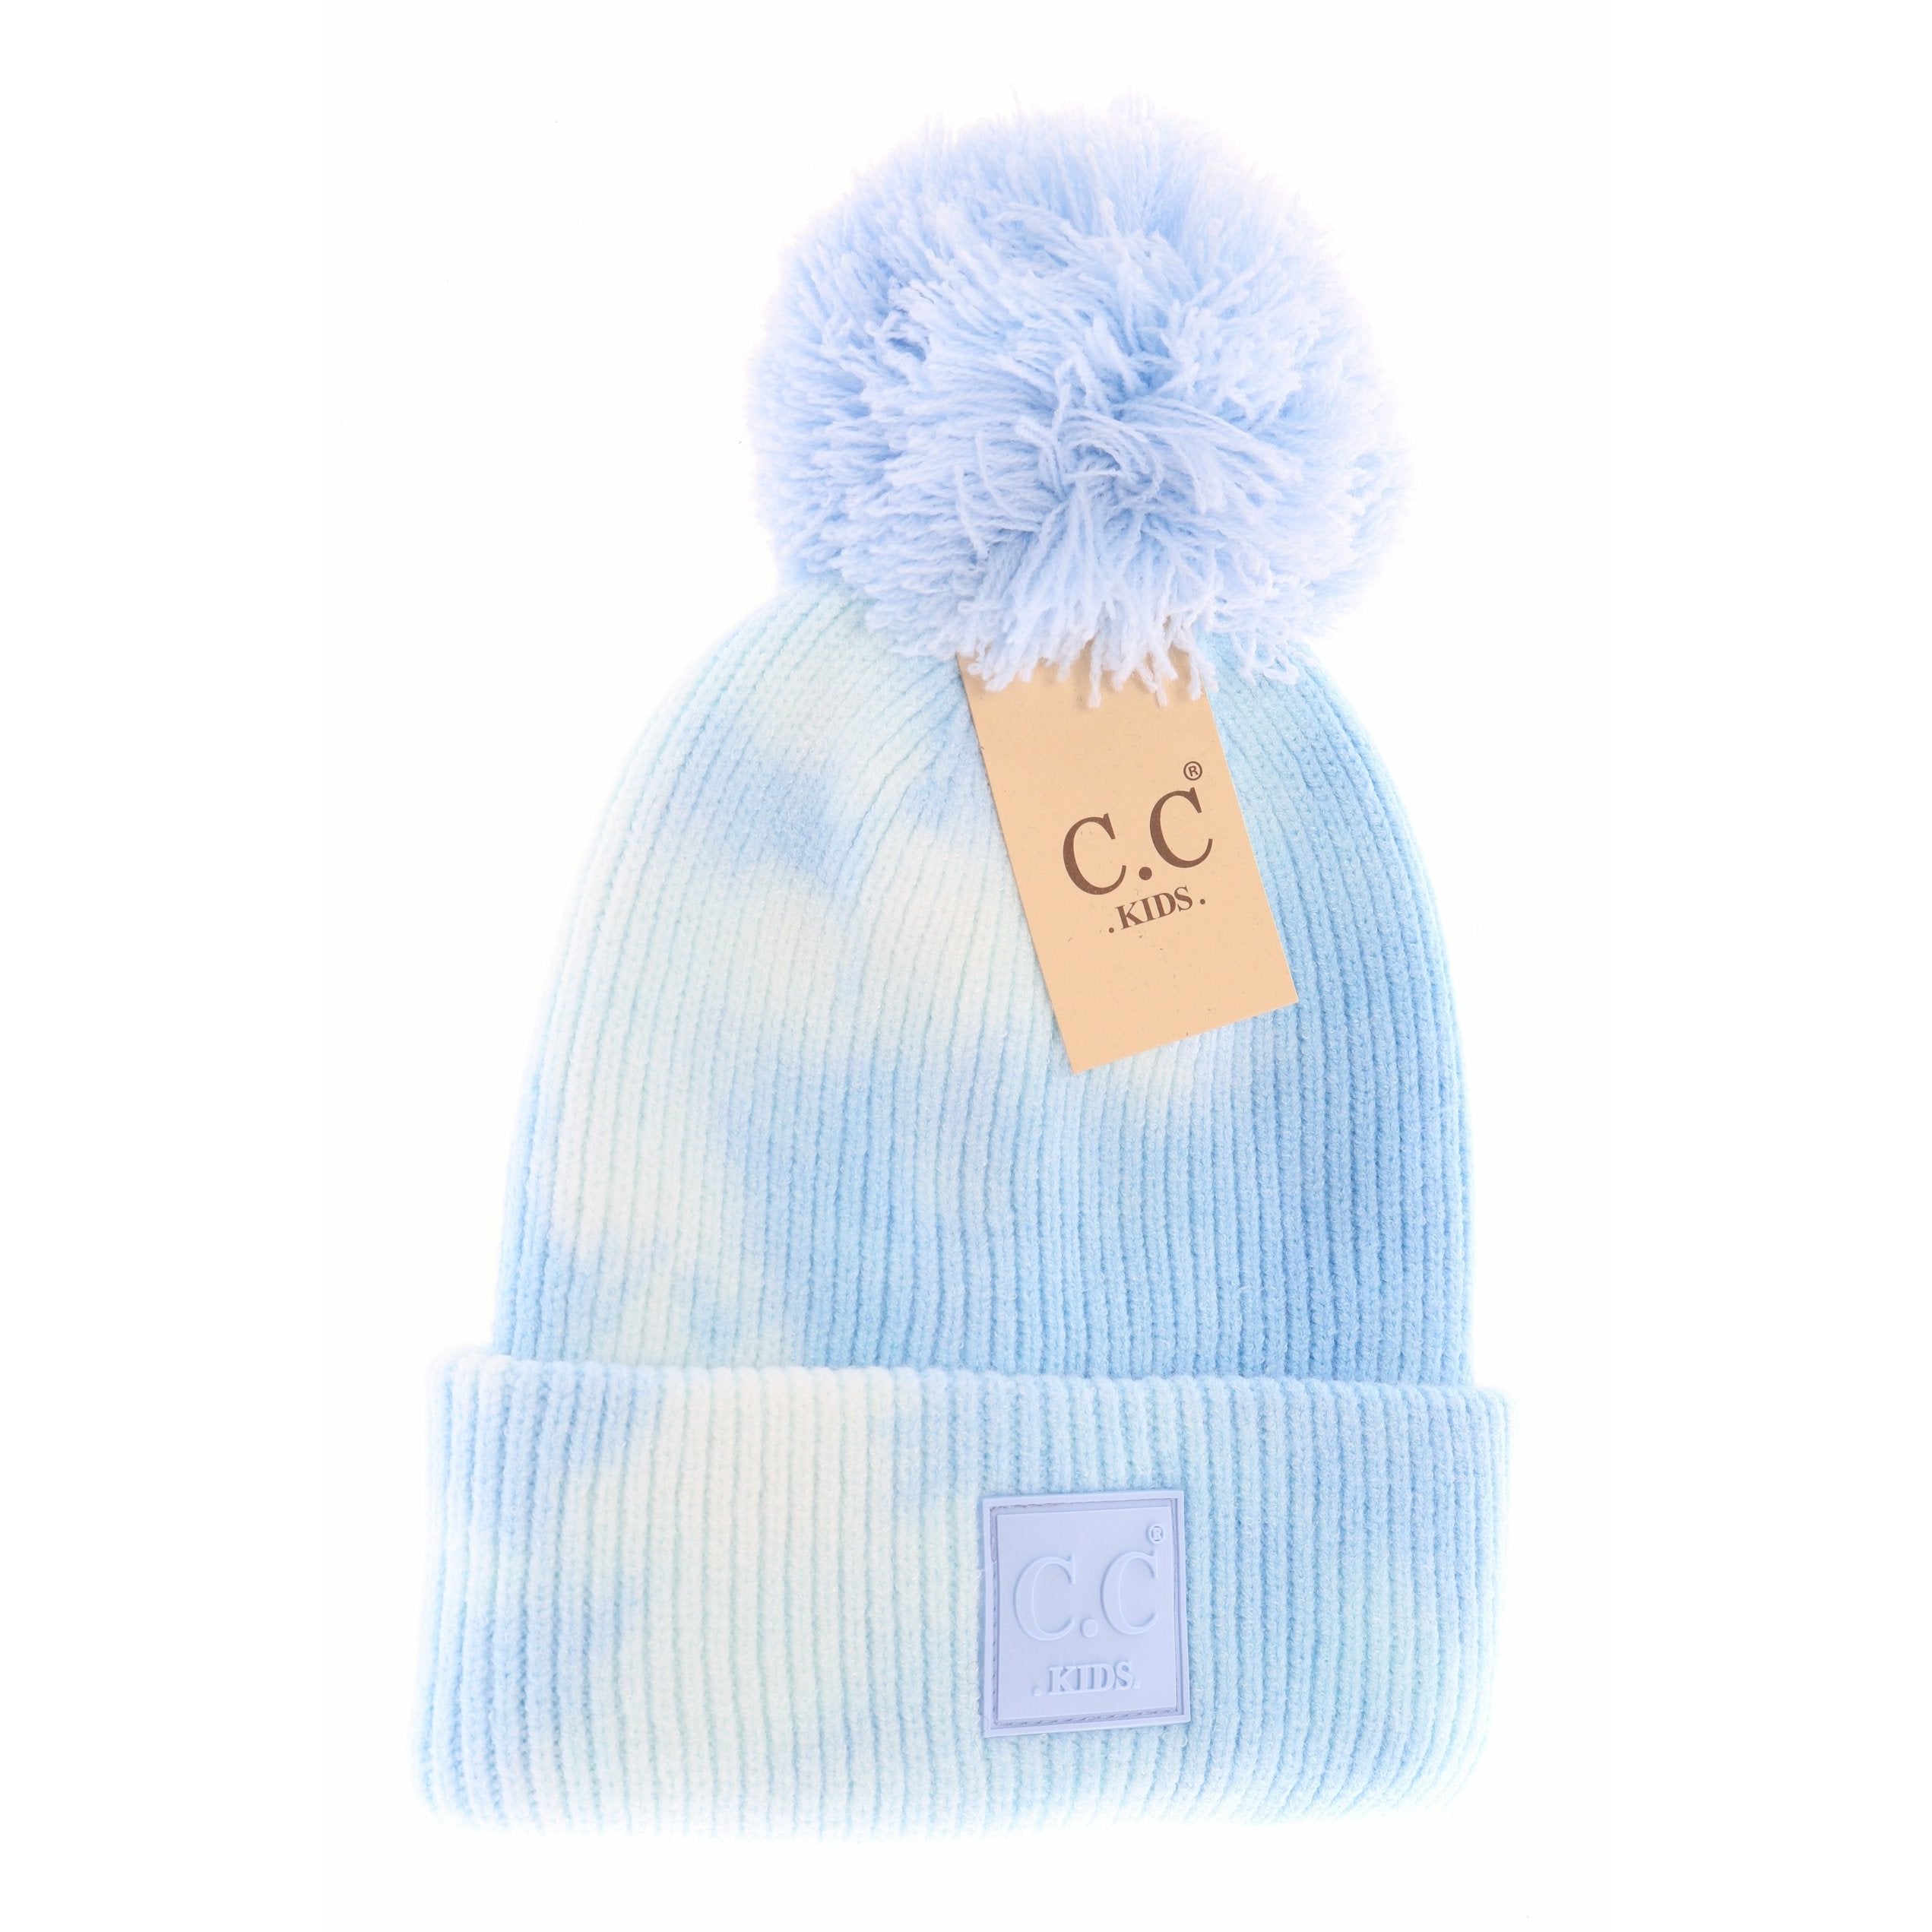 Kids Tie Dye Pom hats (multiple colors)  A Touch of Magnolia Boutique Baby Blue/White  